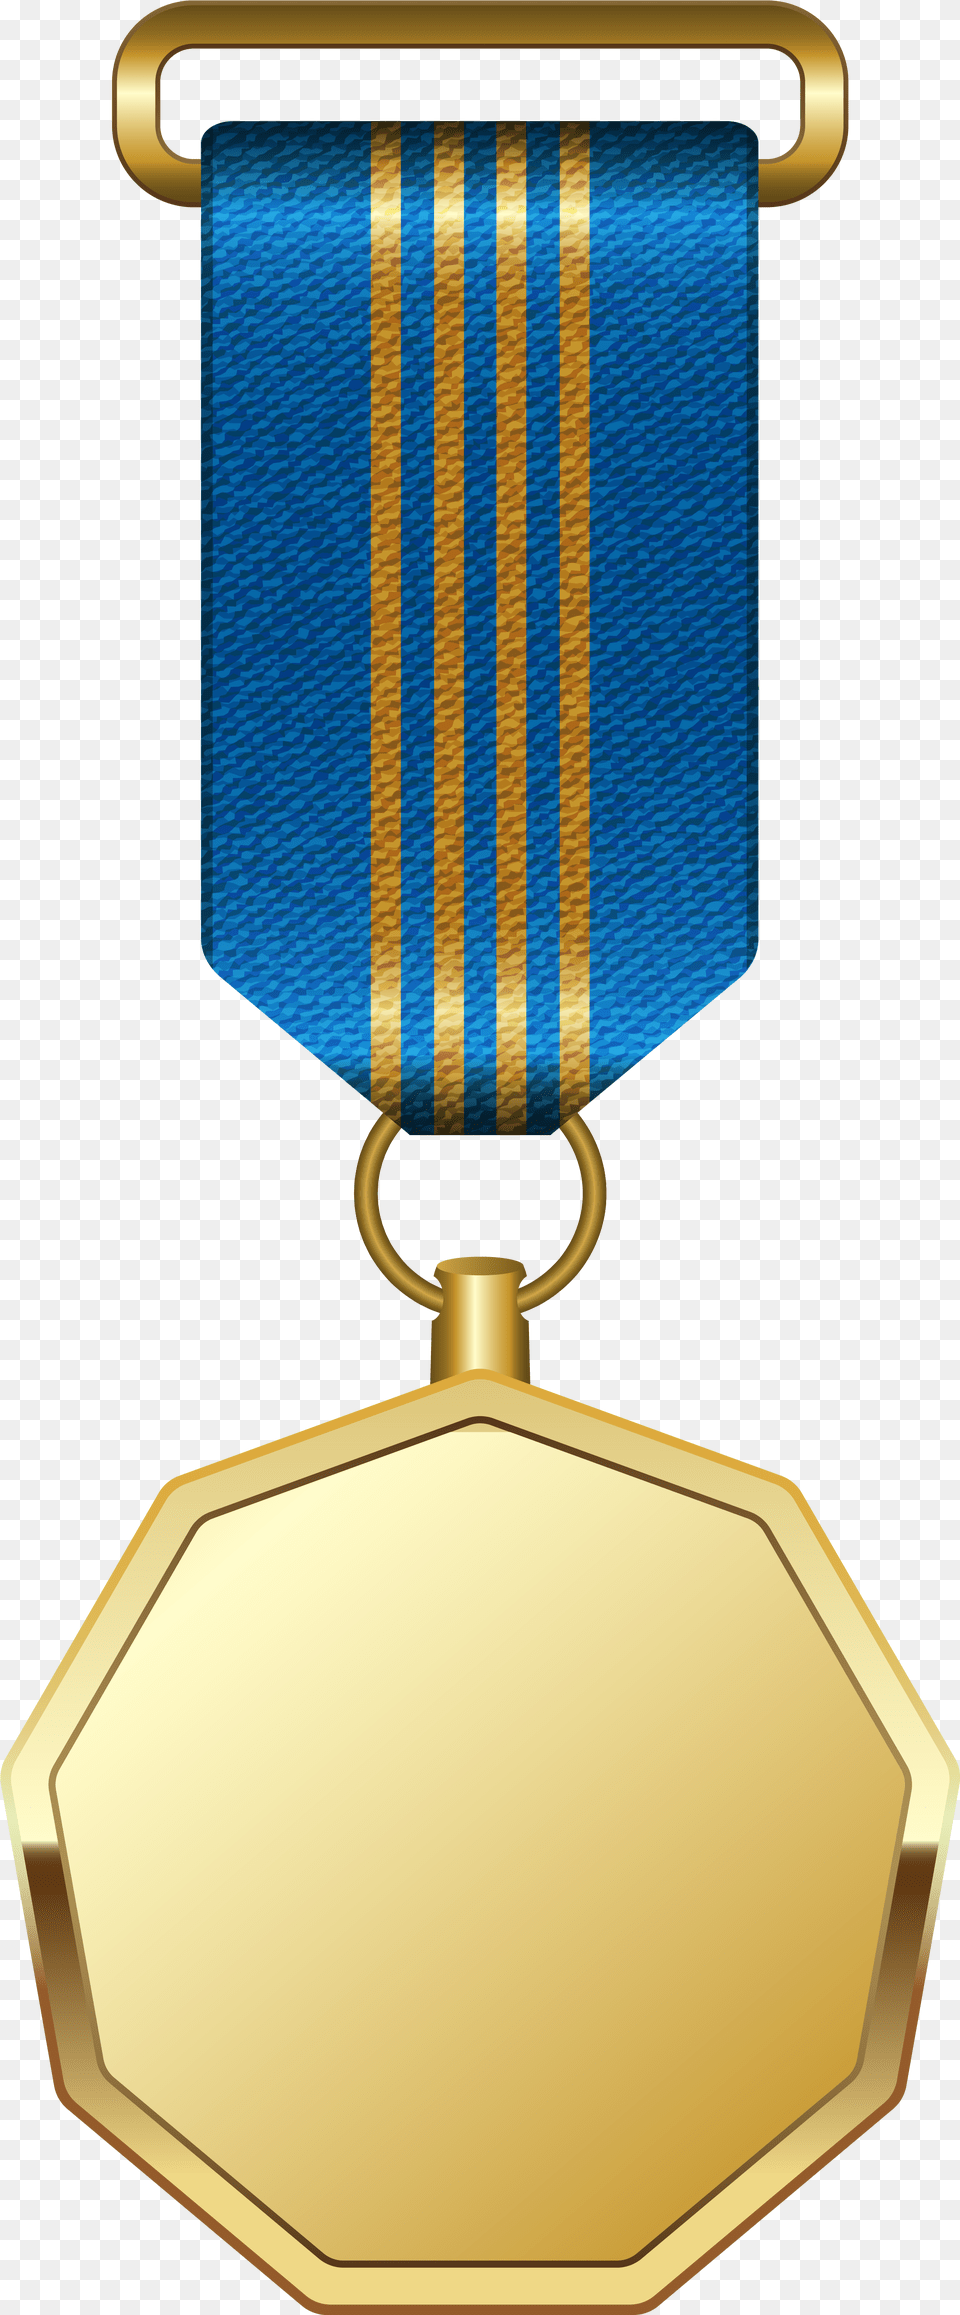 Gold Medal Medal With Ribbon, Gold Medal, Trophy, Accessories Png